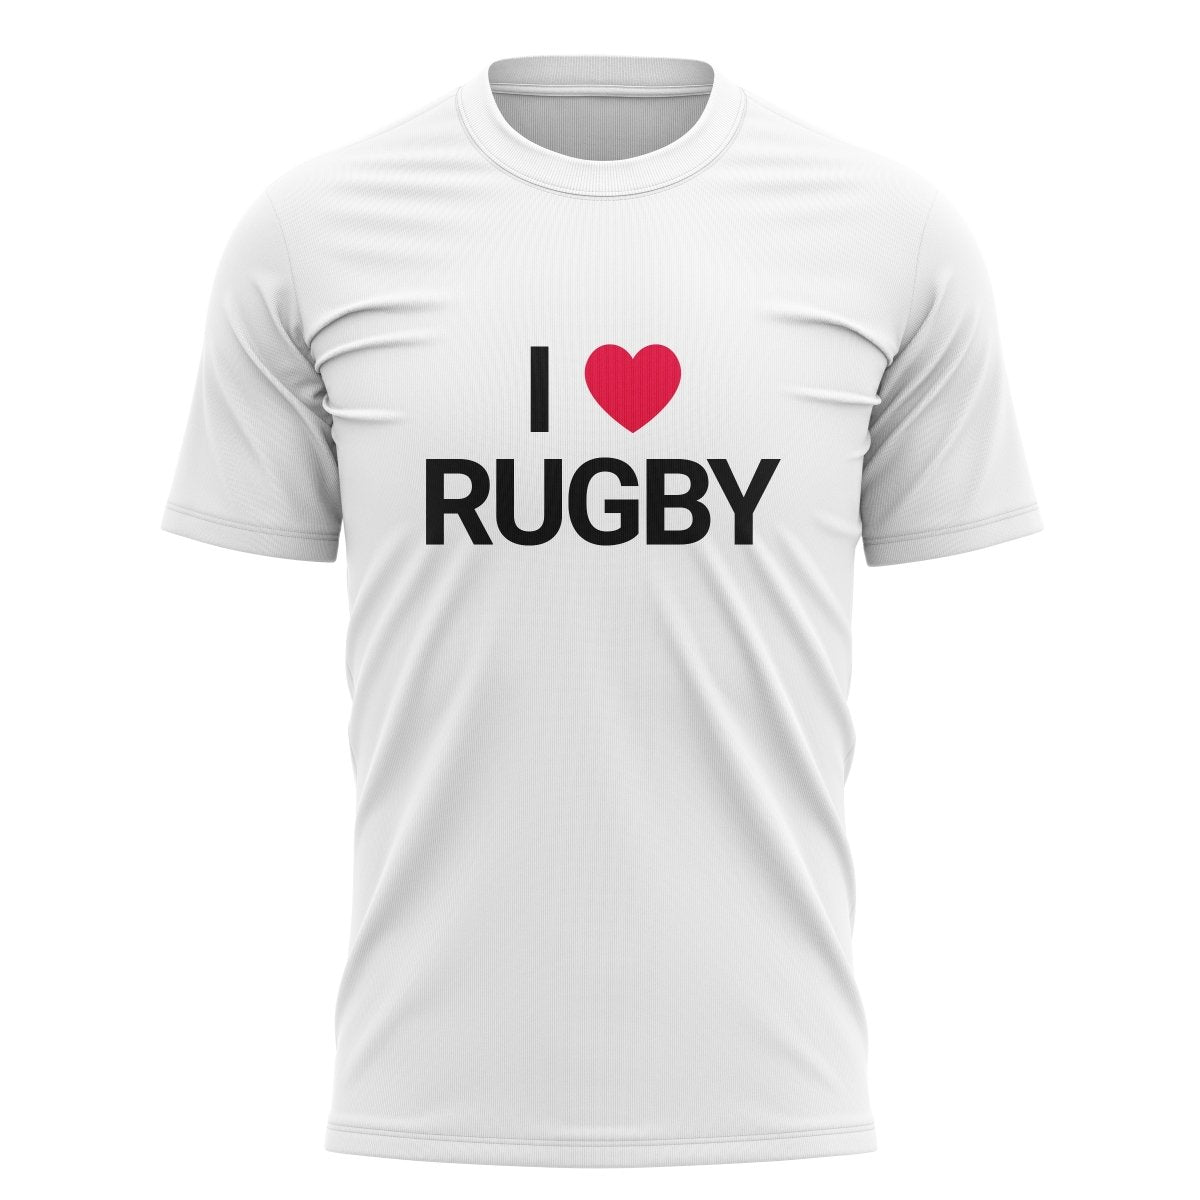 I Love Rugby Graphic Tee - www.therugbyshop.com www.therugbyshop.com MEN'S / BLACK / S SANMAR TEES I Love Rugby Graphic Tee